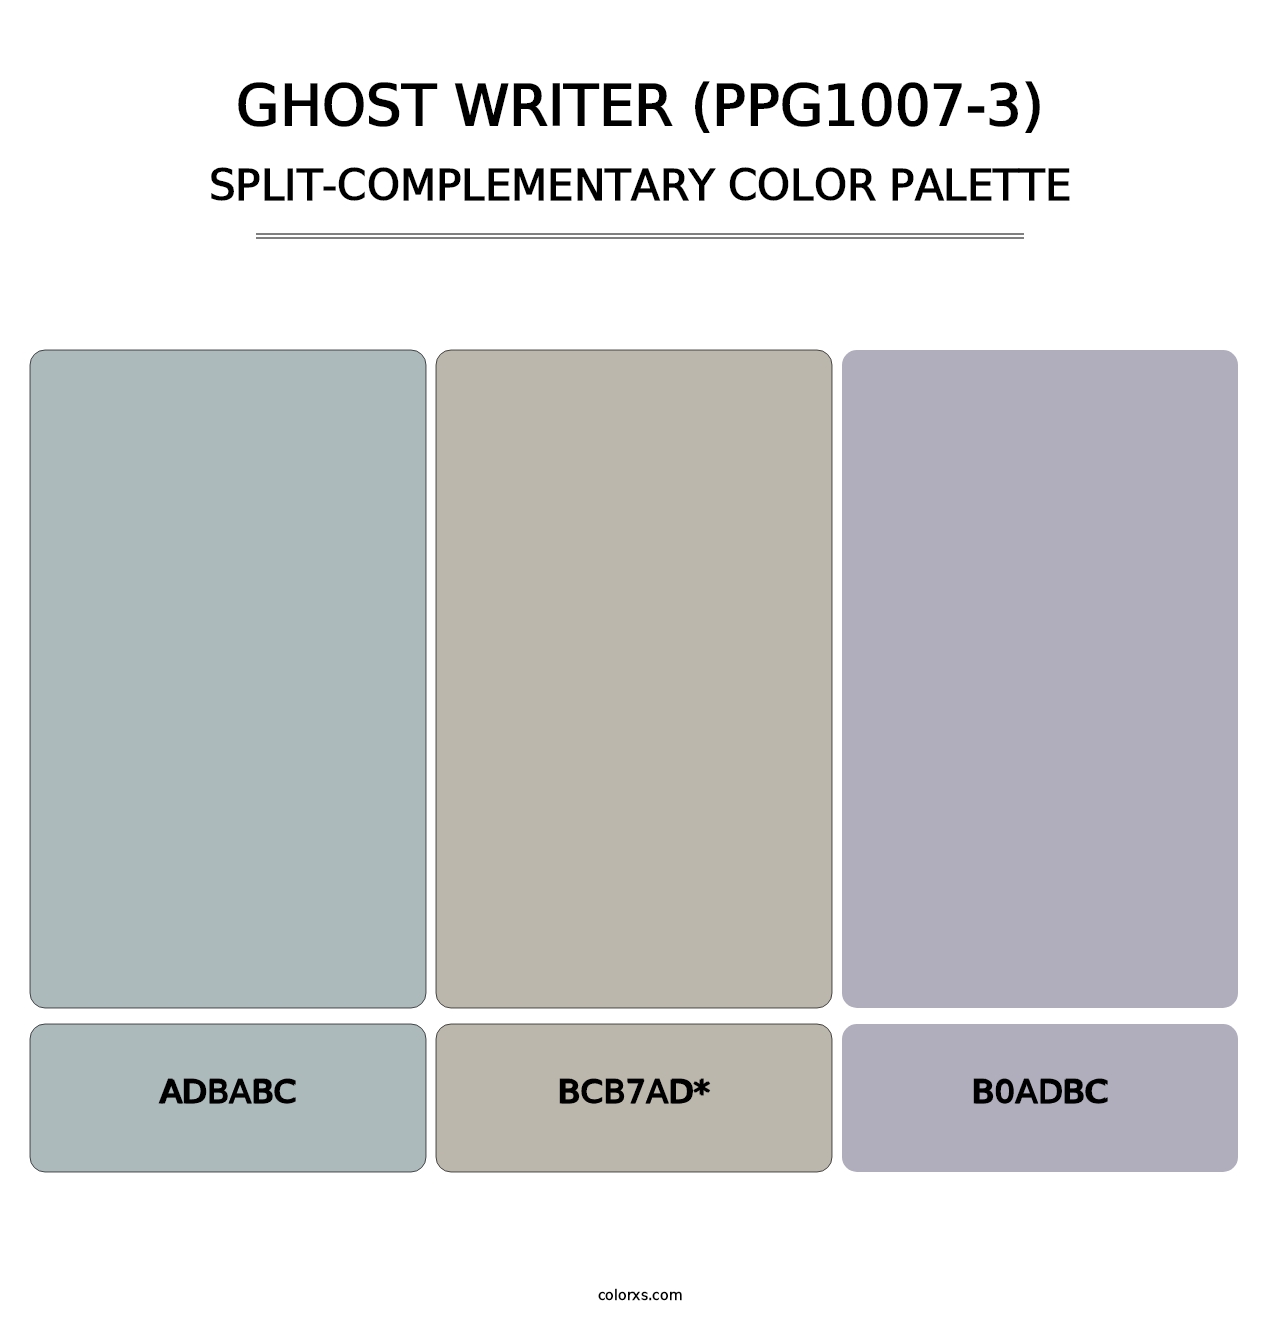 Ghost Writer (PPG1007-3) - Split-Complementary Color Palette